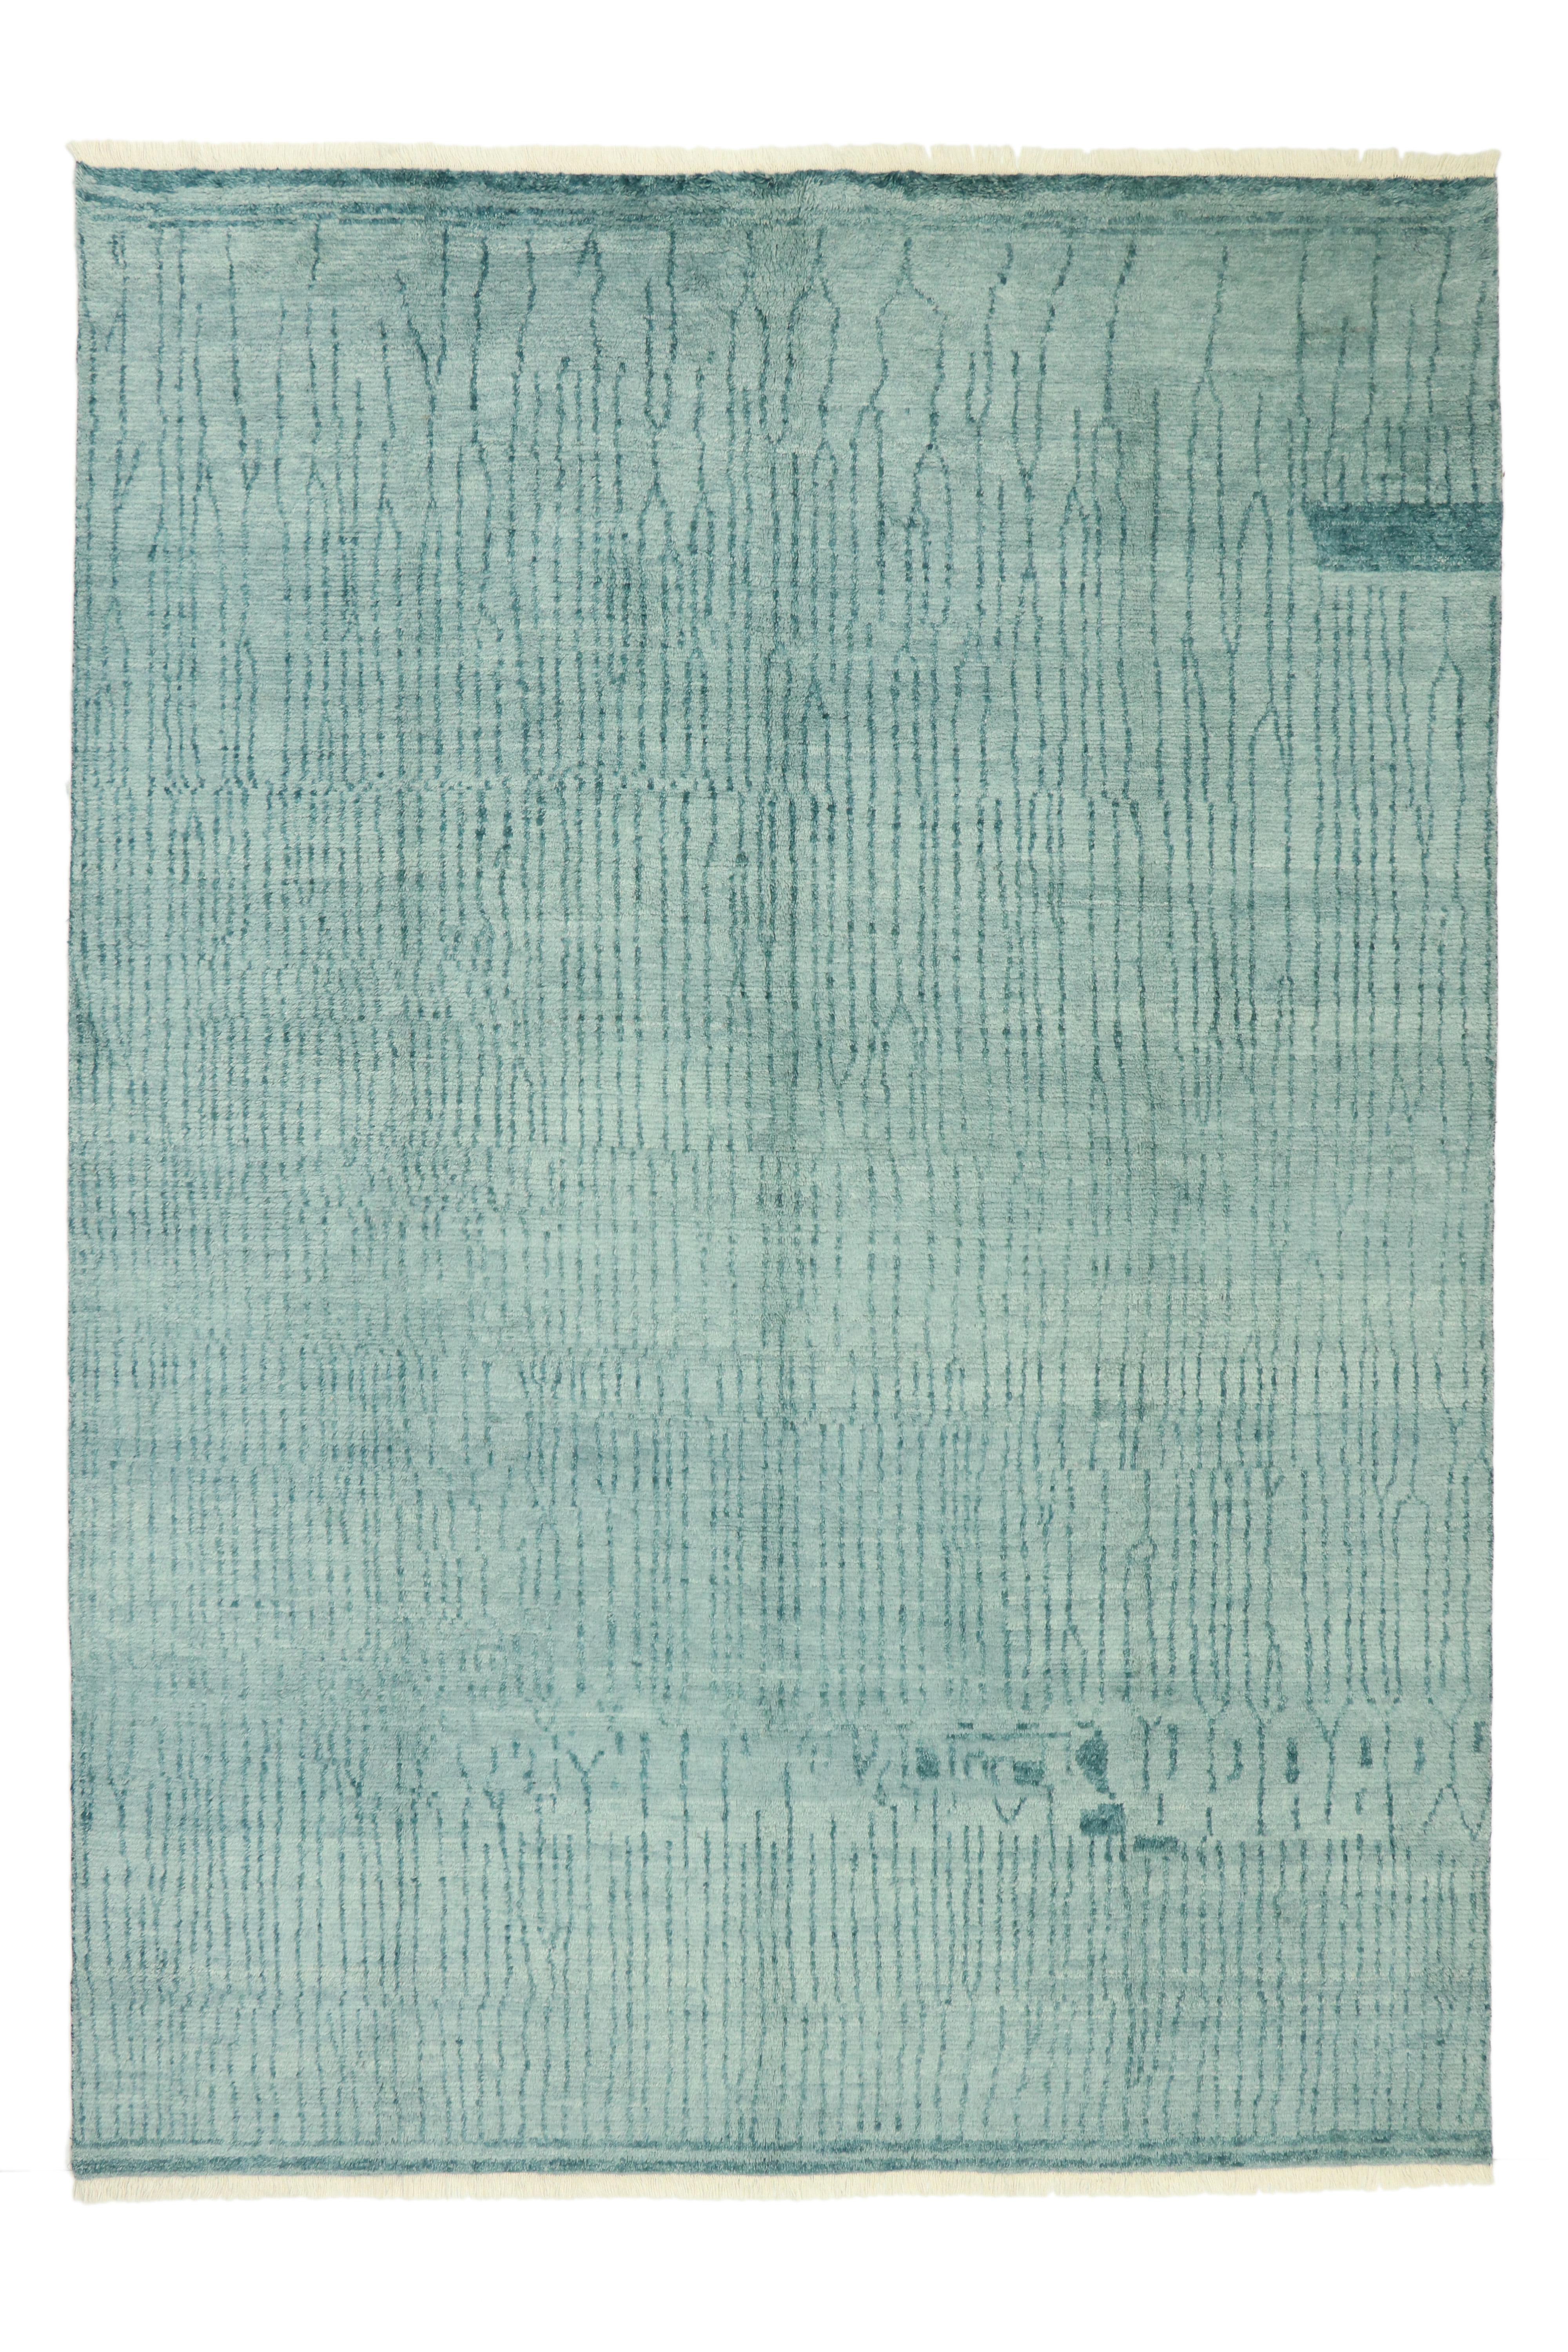 30357  Contemporary Coastal Moroccan Style Rug, Postmodern Cape Cod Style. Postmodern Cape Cod meets coastal vibe without going over the top in this contemporary Moroccan style rug. The subtle abstract design combined with the teal hues create a